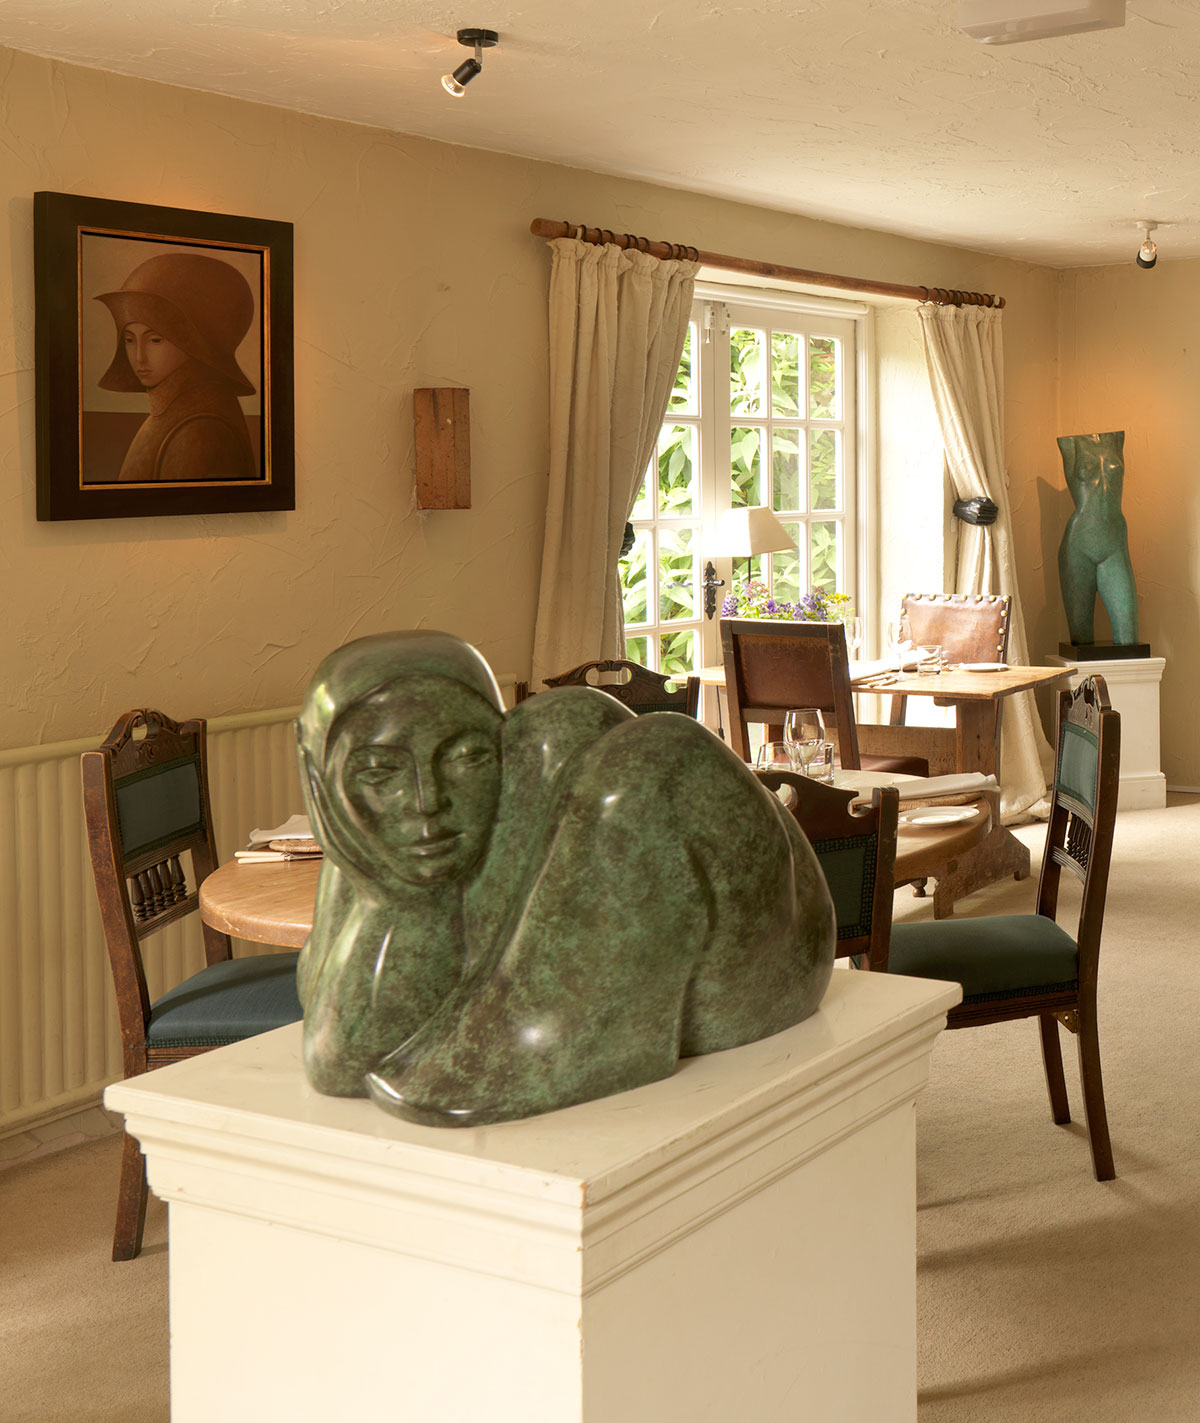 Sculpture of Girl curled, in dining room, by Michael Cooper.